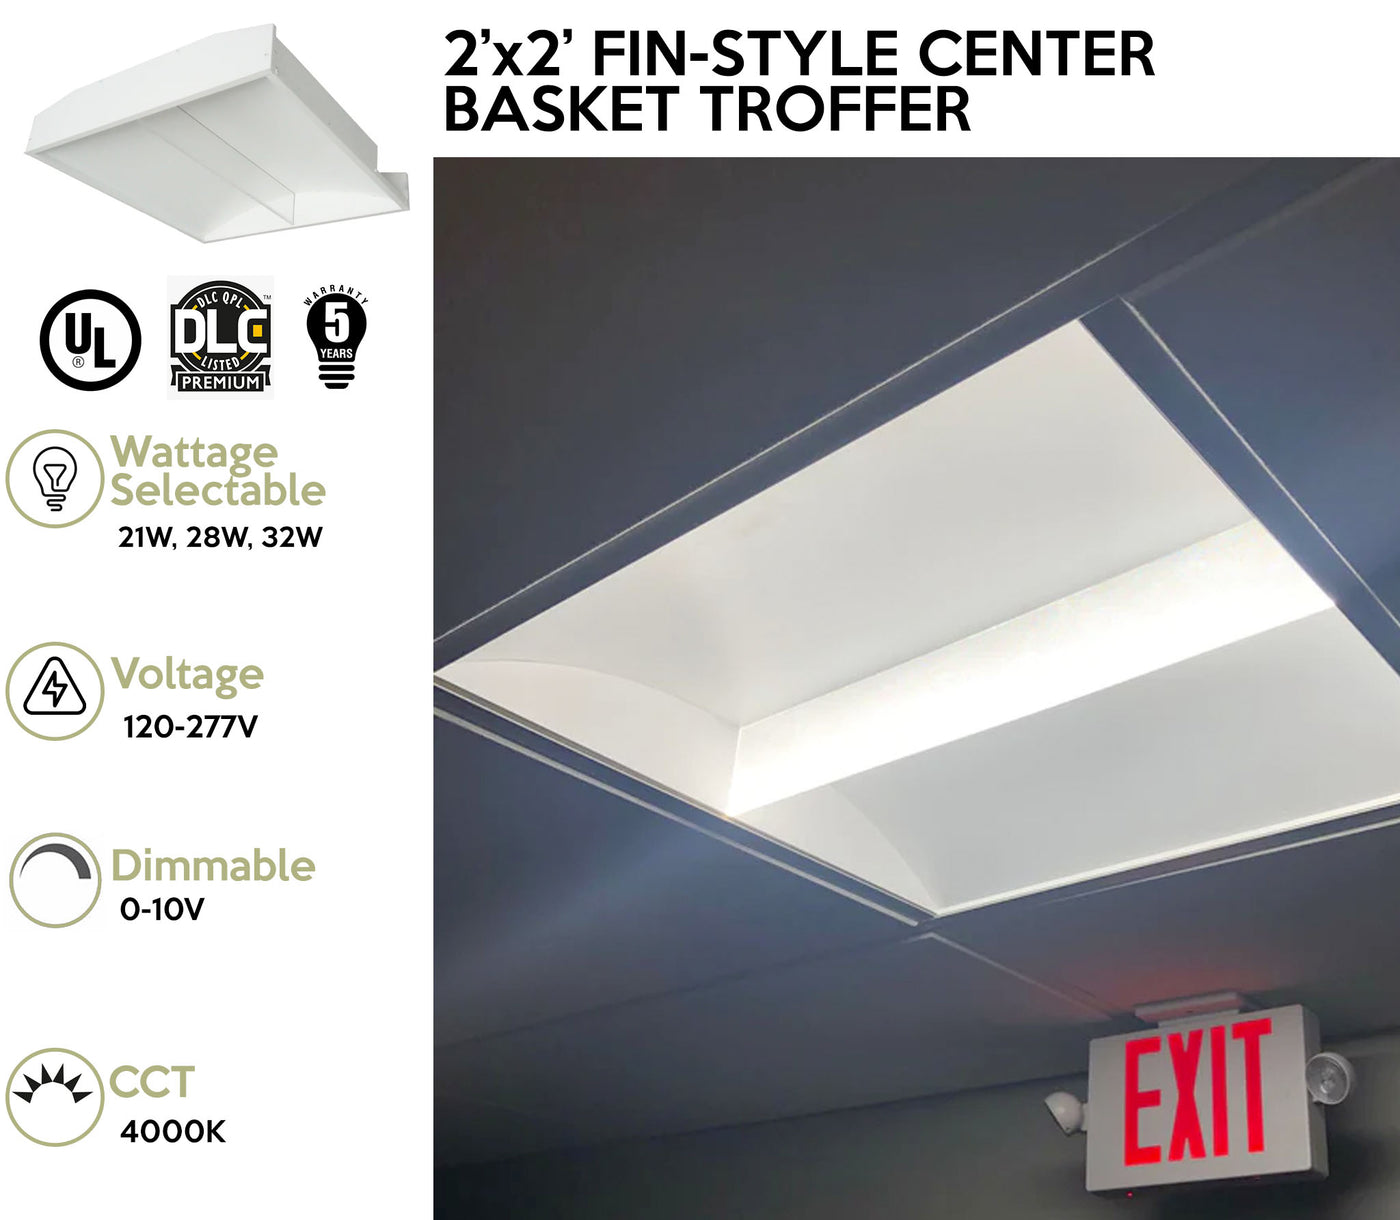 2 x 2 Foot LED Fin-Style Center Basket Troffer, Wattage Selectable: 21/28/32, 120-277V, 4000K